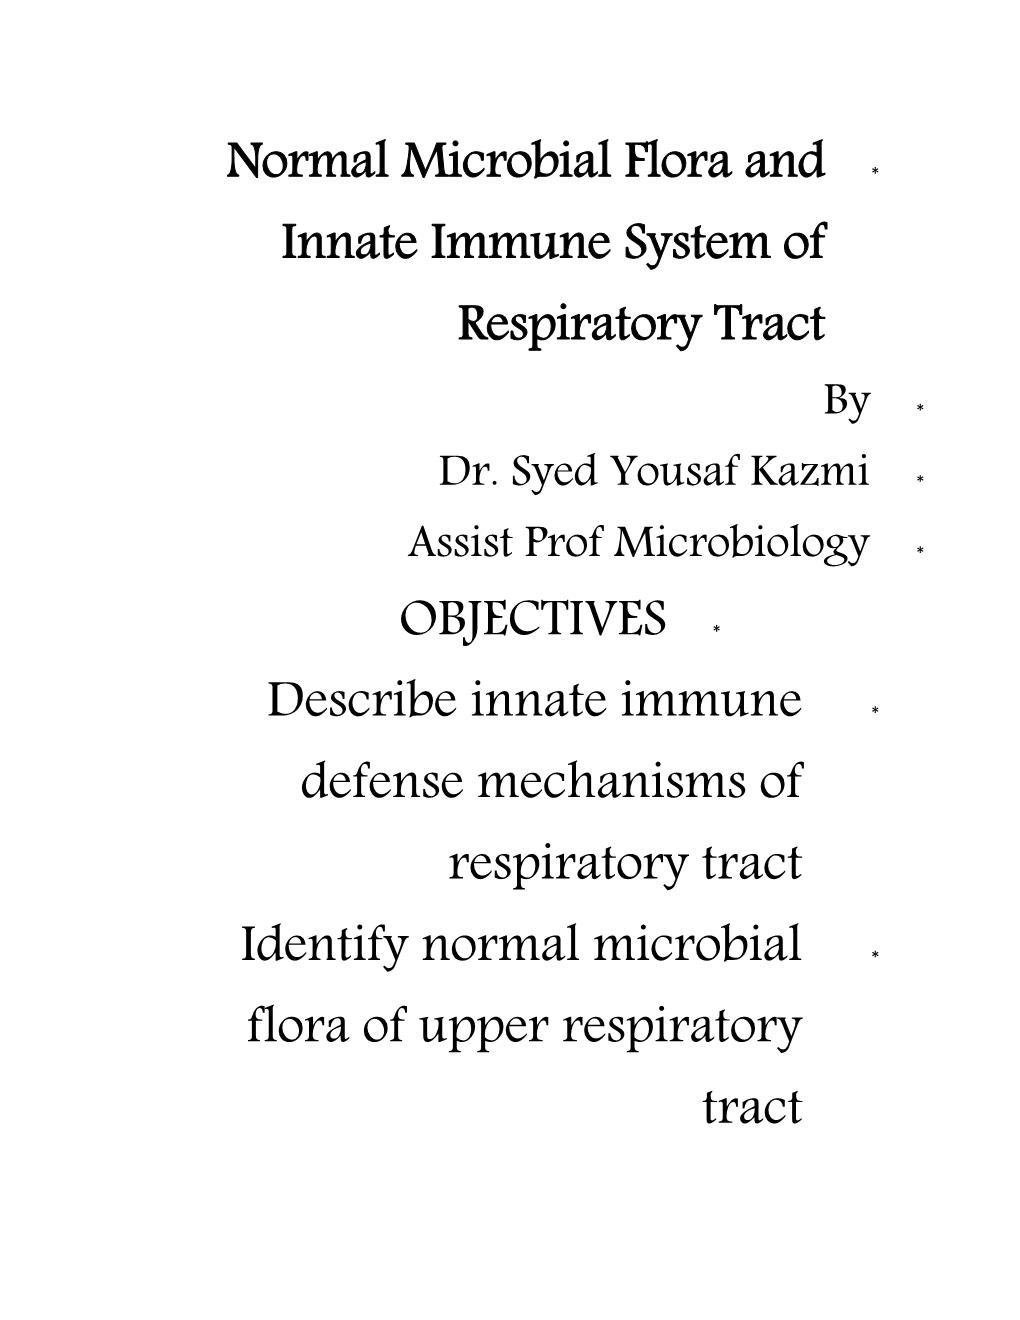 Normal Microbial Flora and Innate Immune System of Respiratory Tract